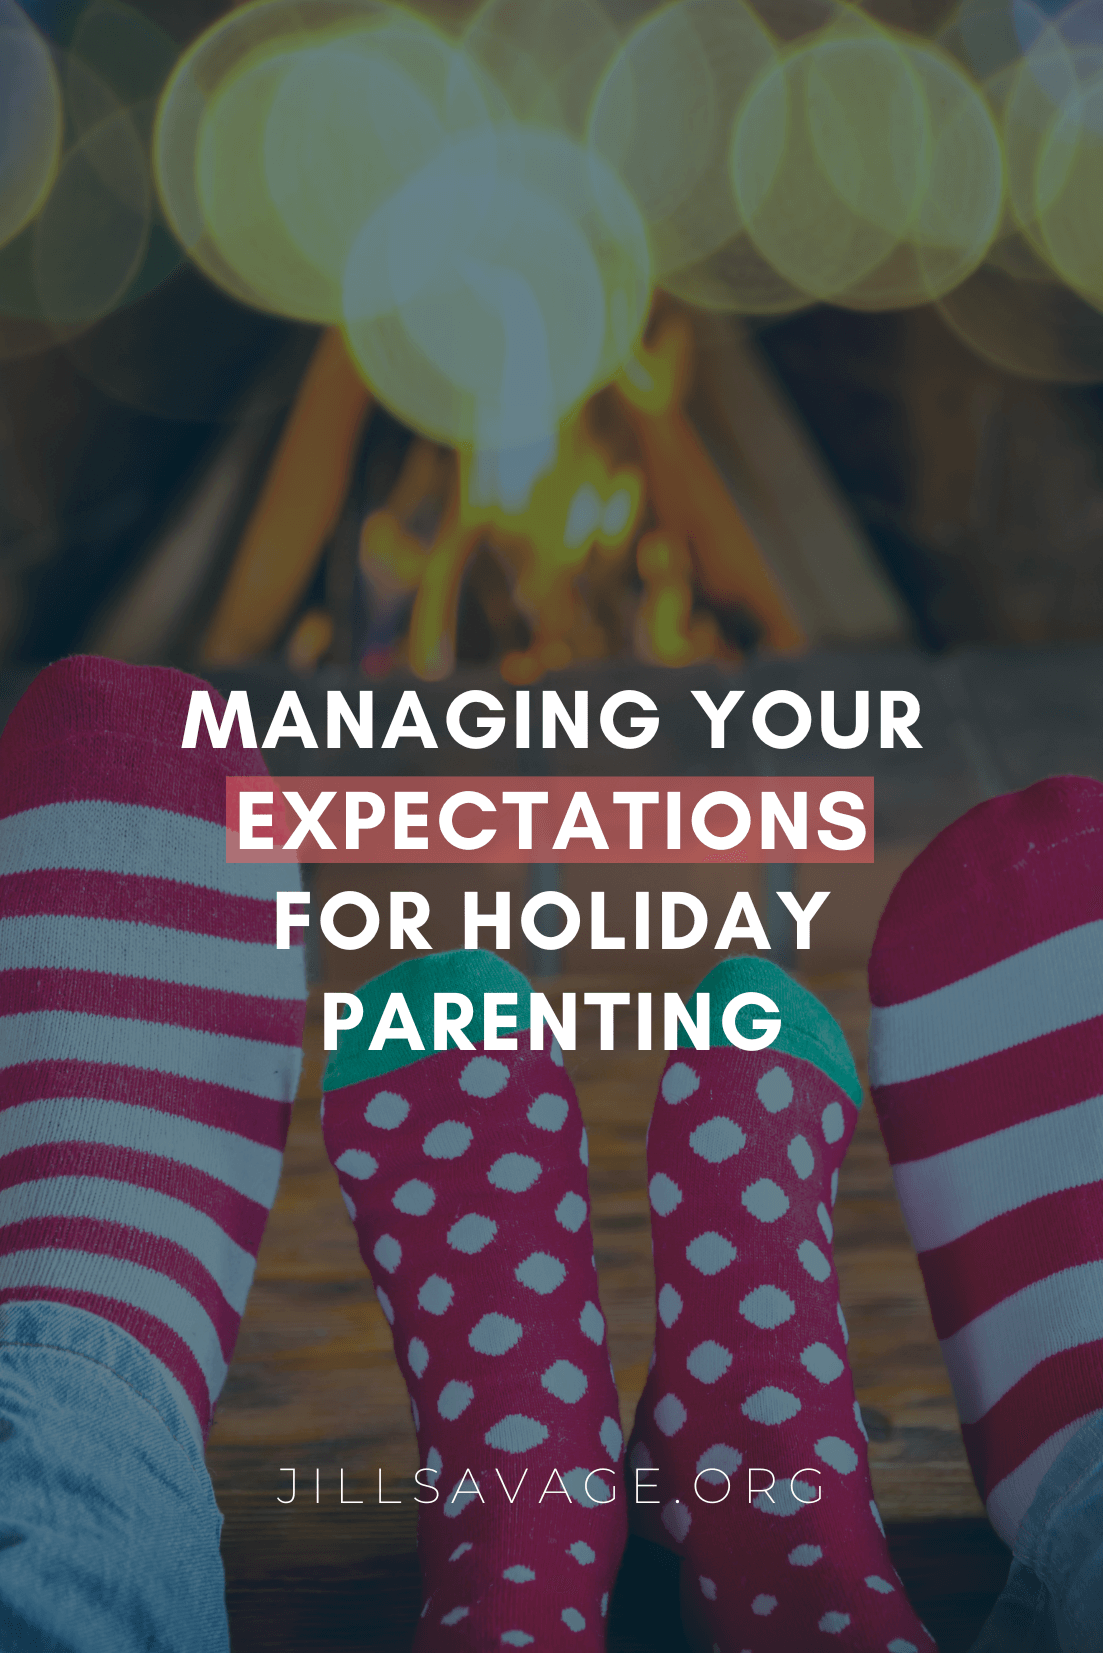 Managing Your Expectations for Holiday Parenting